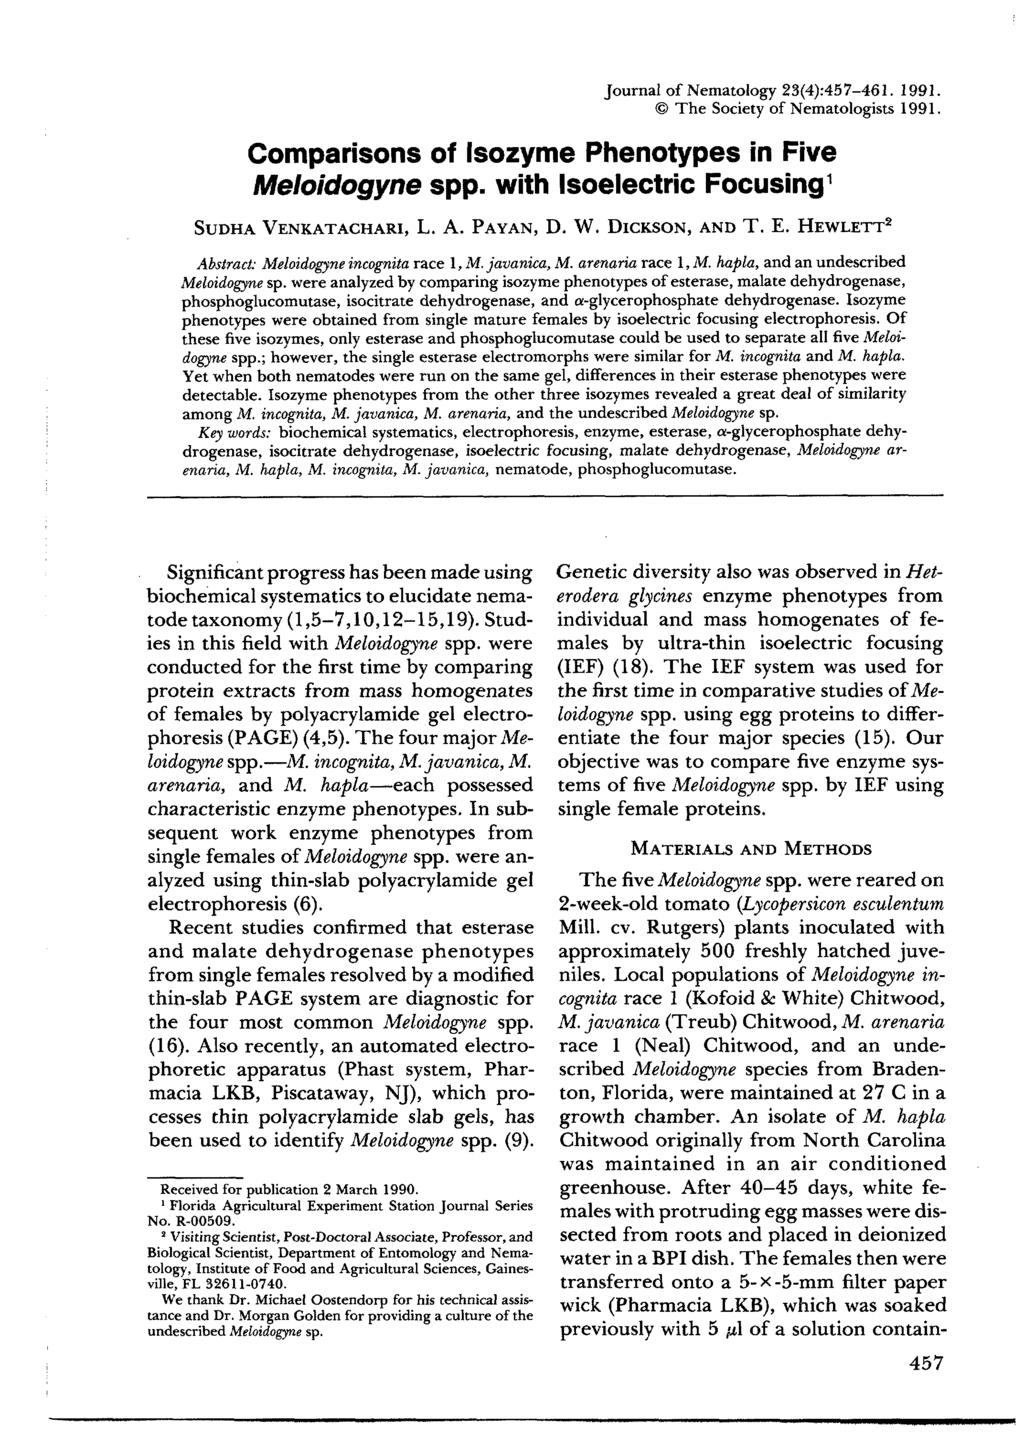 Journal of Nematology 23(4):457-461. 1991. The Society of Nematologists 1991. Comparisons of Isozyme Phenotypes in Five Meloidogyne spp. with Isoelectric Focusing 1 SUDHA VENKATACHAR1, L. A. PAYAN, D.